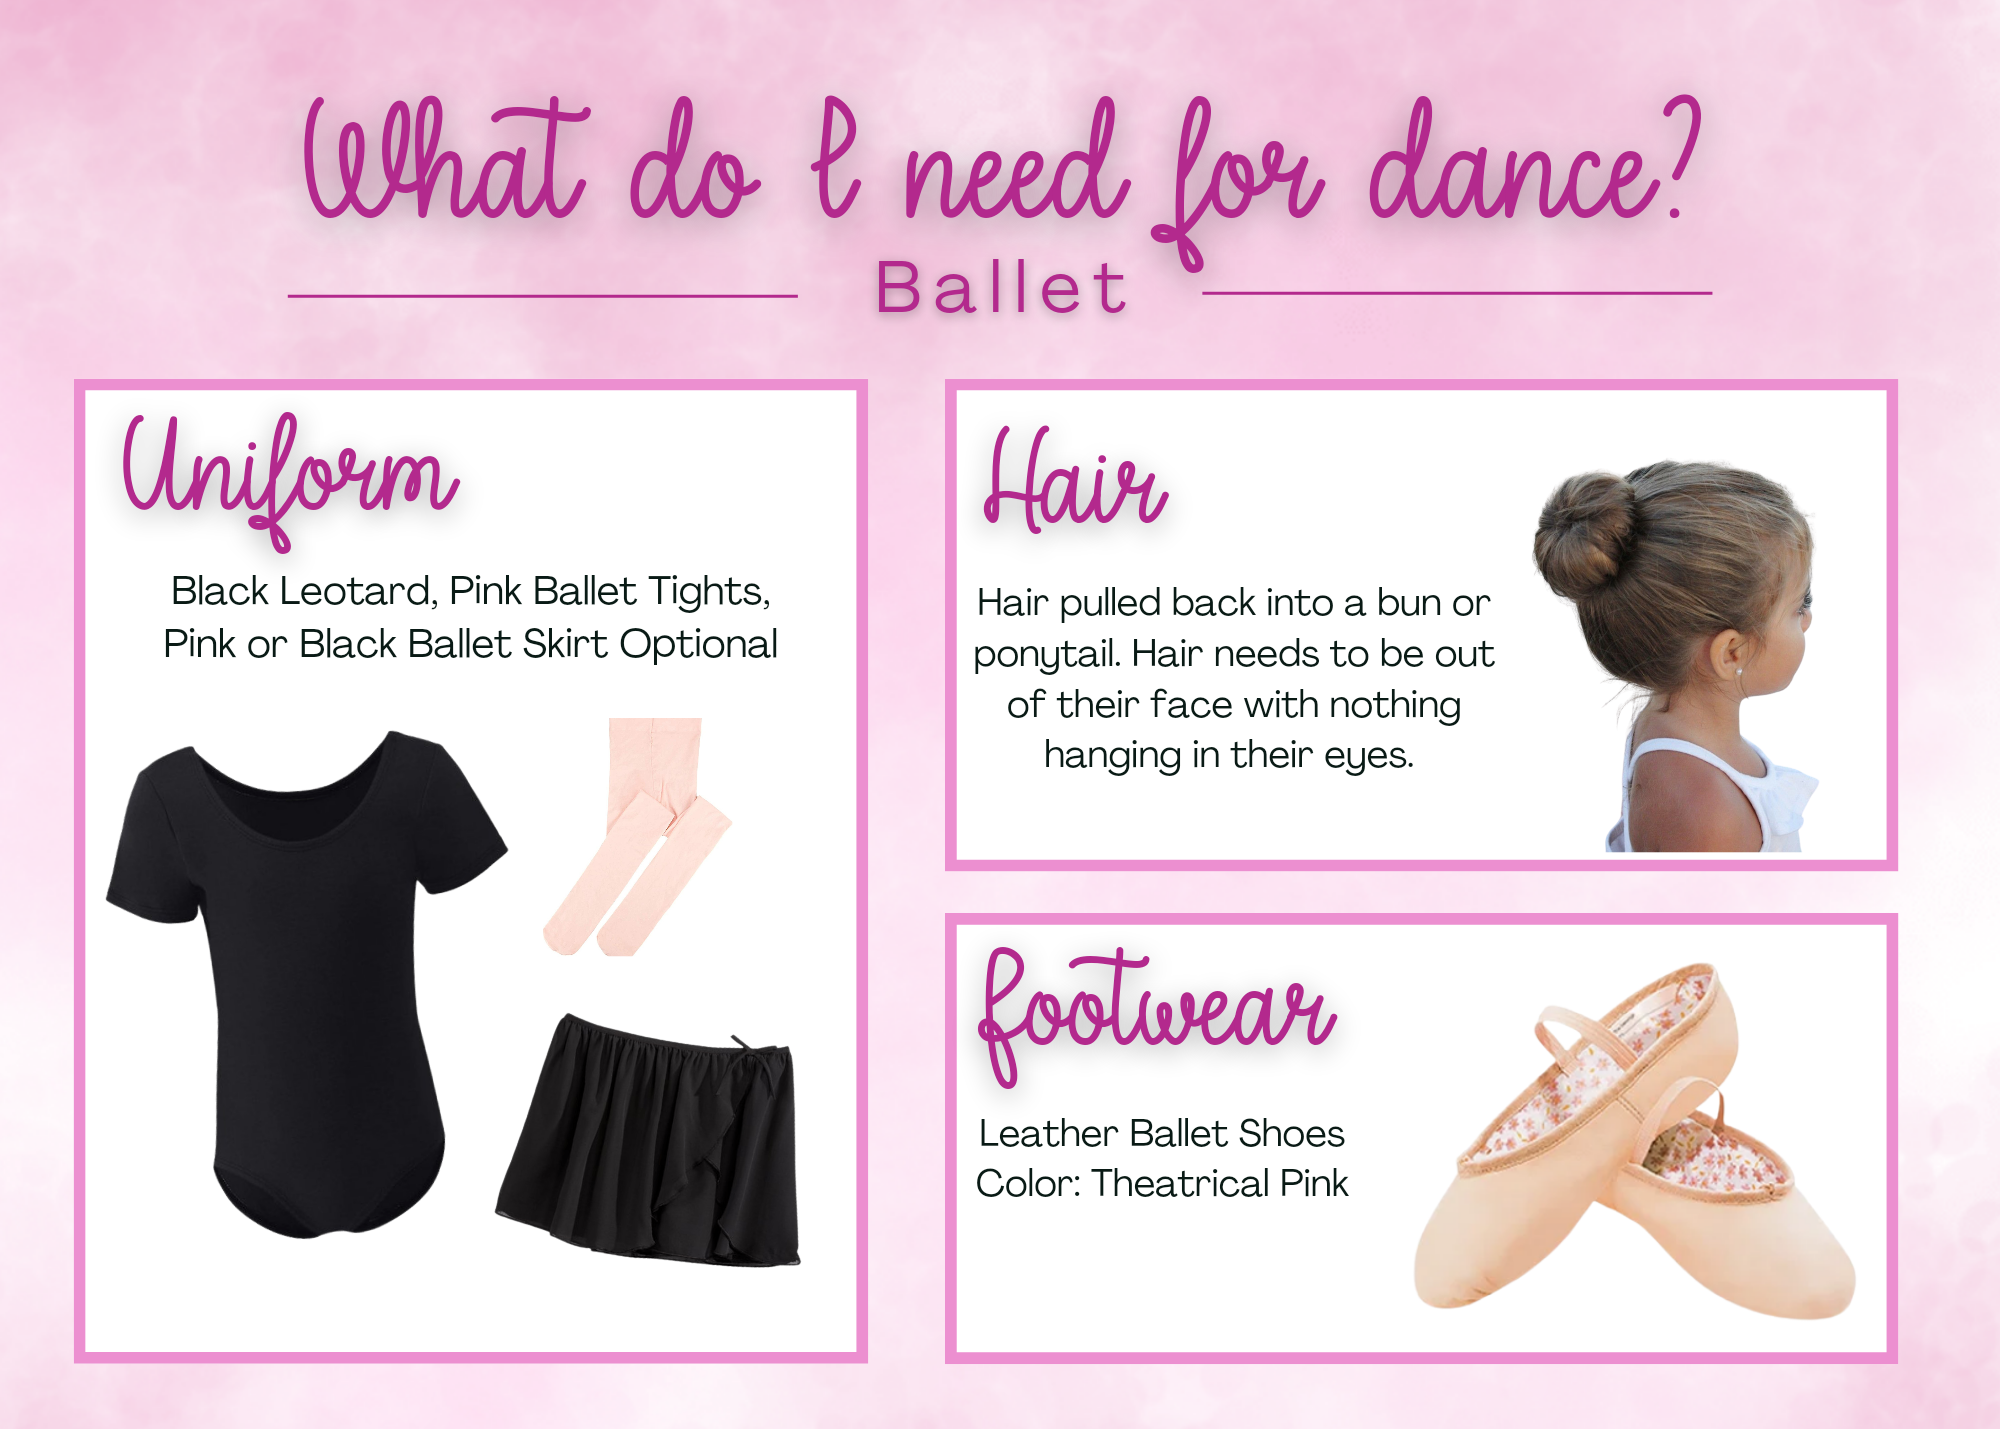 Beyond the Barre: Leotard, Tights, Hair in a Bun; What's Up With